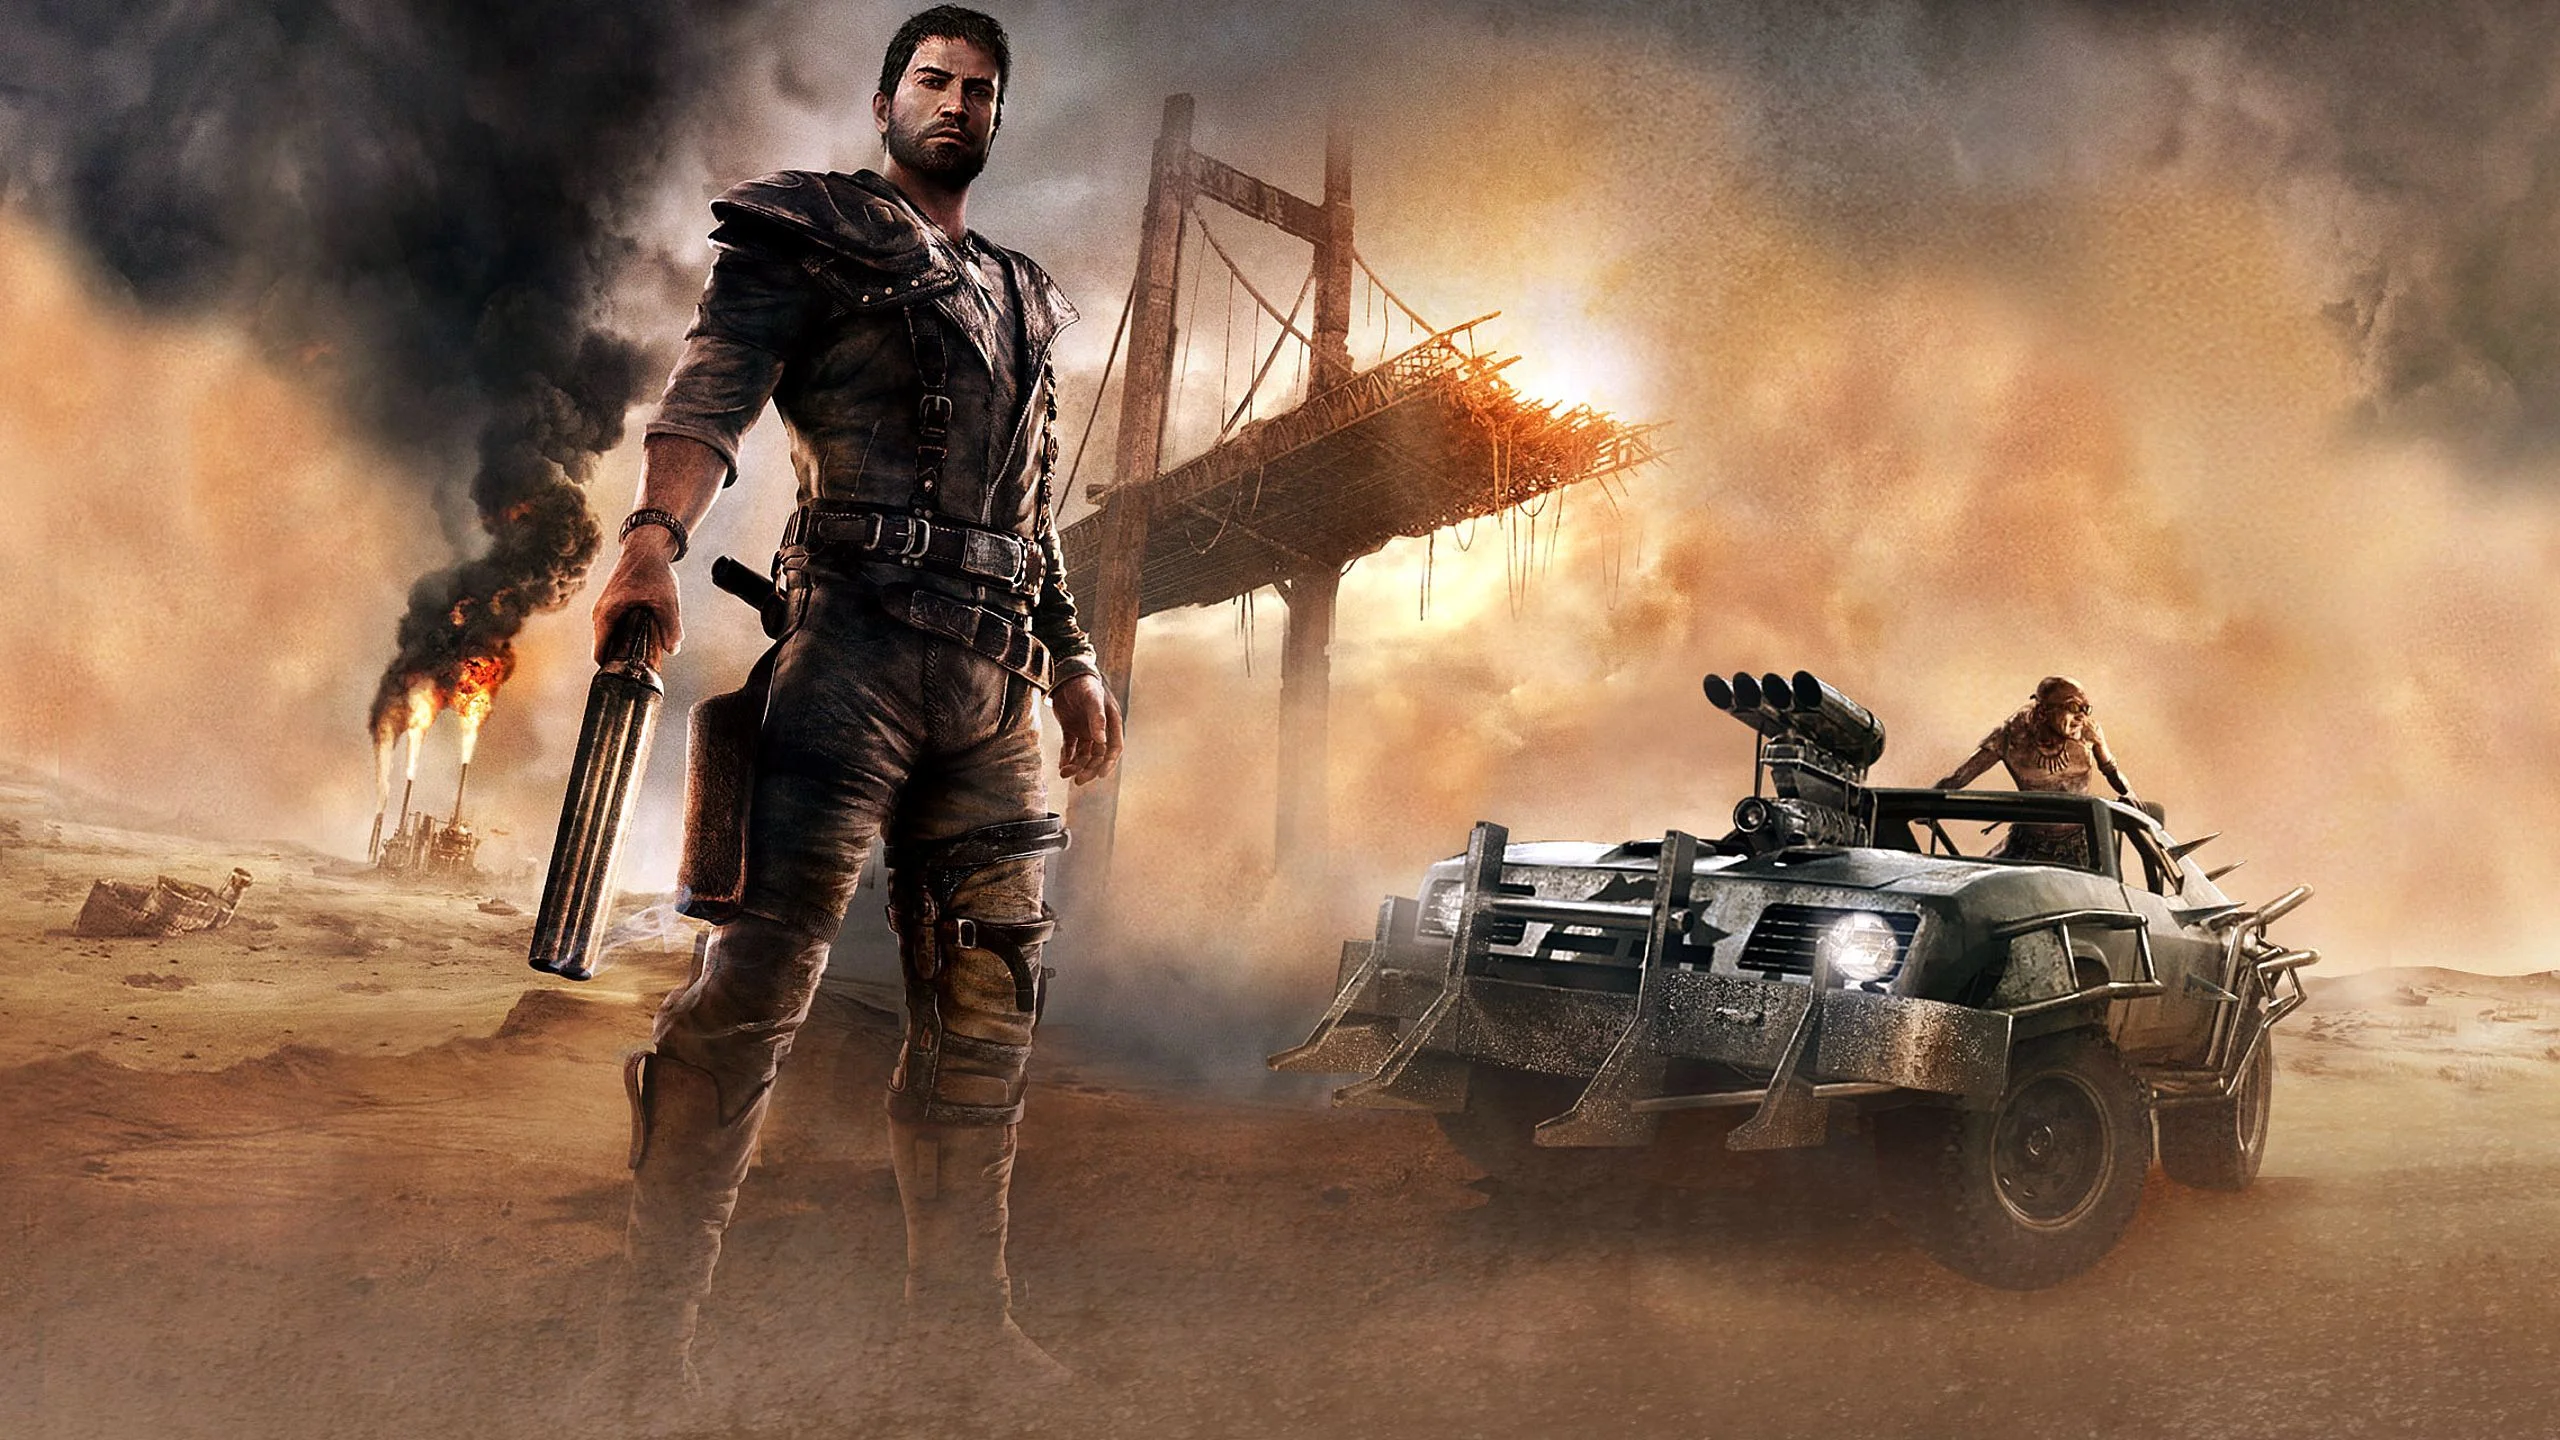 Mad Max director wants Hideo Kojima to make a game based on the franchise